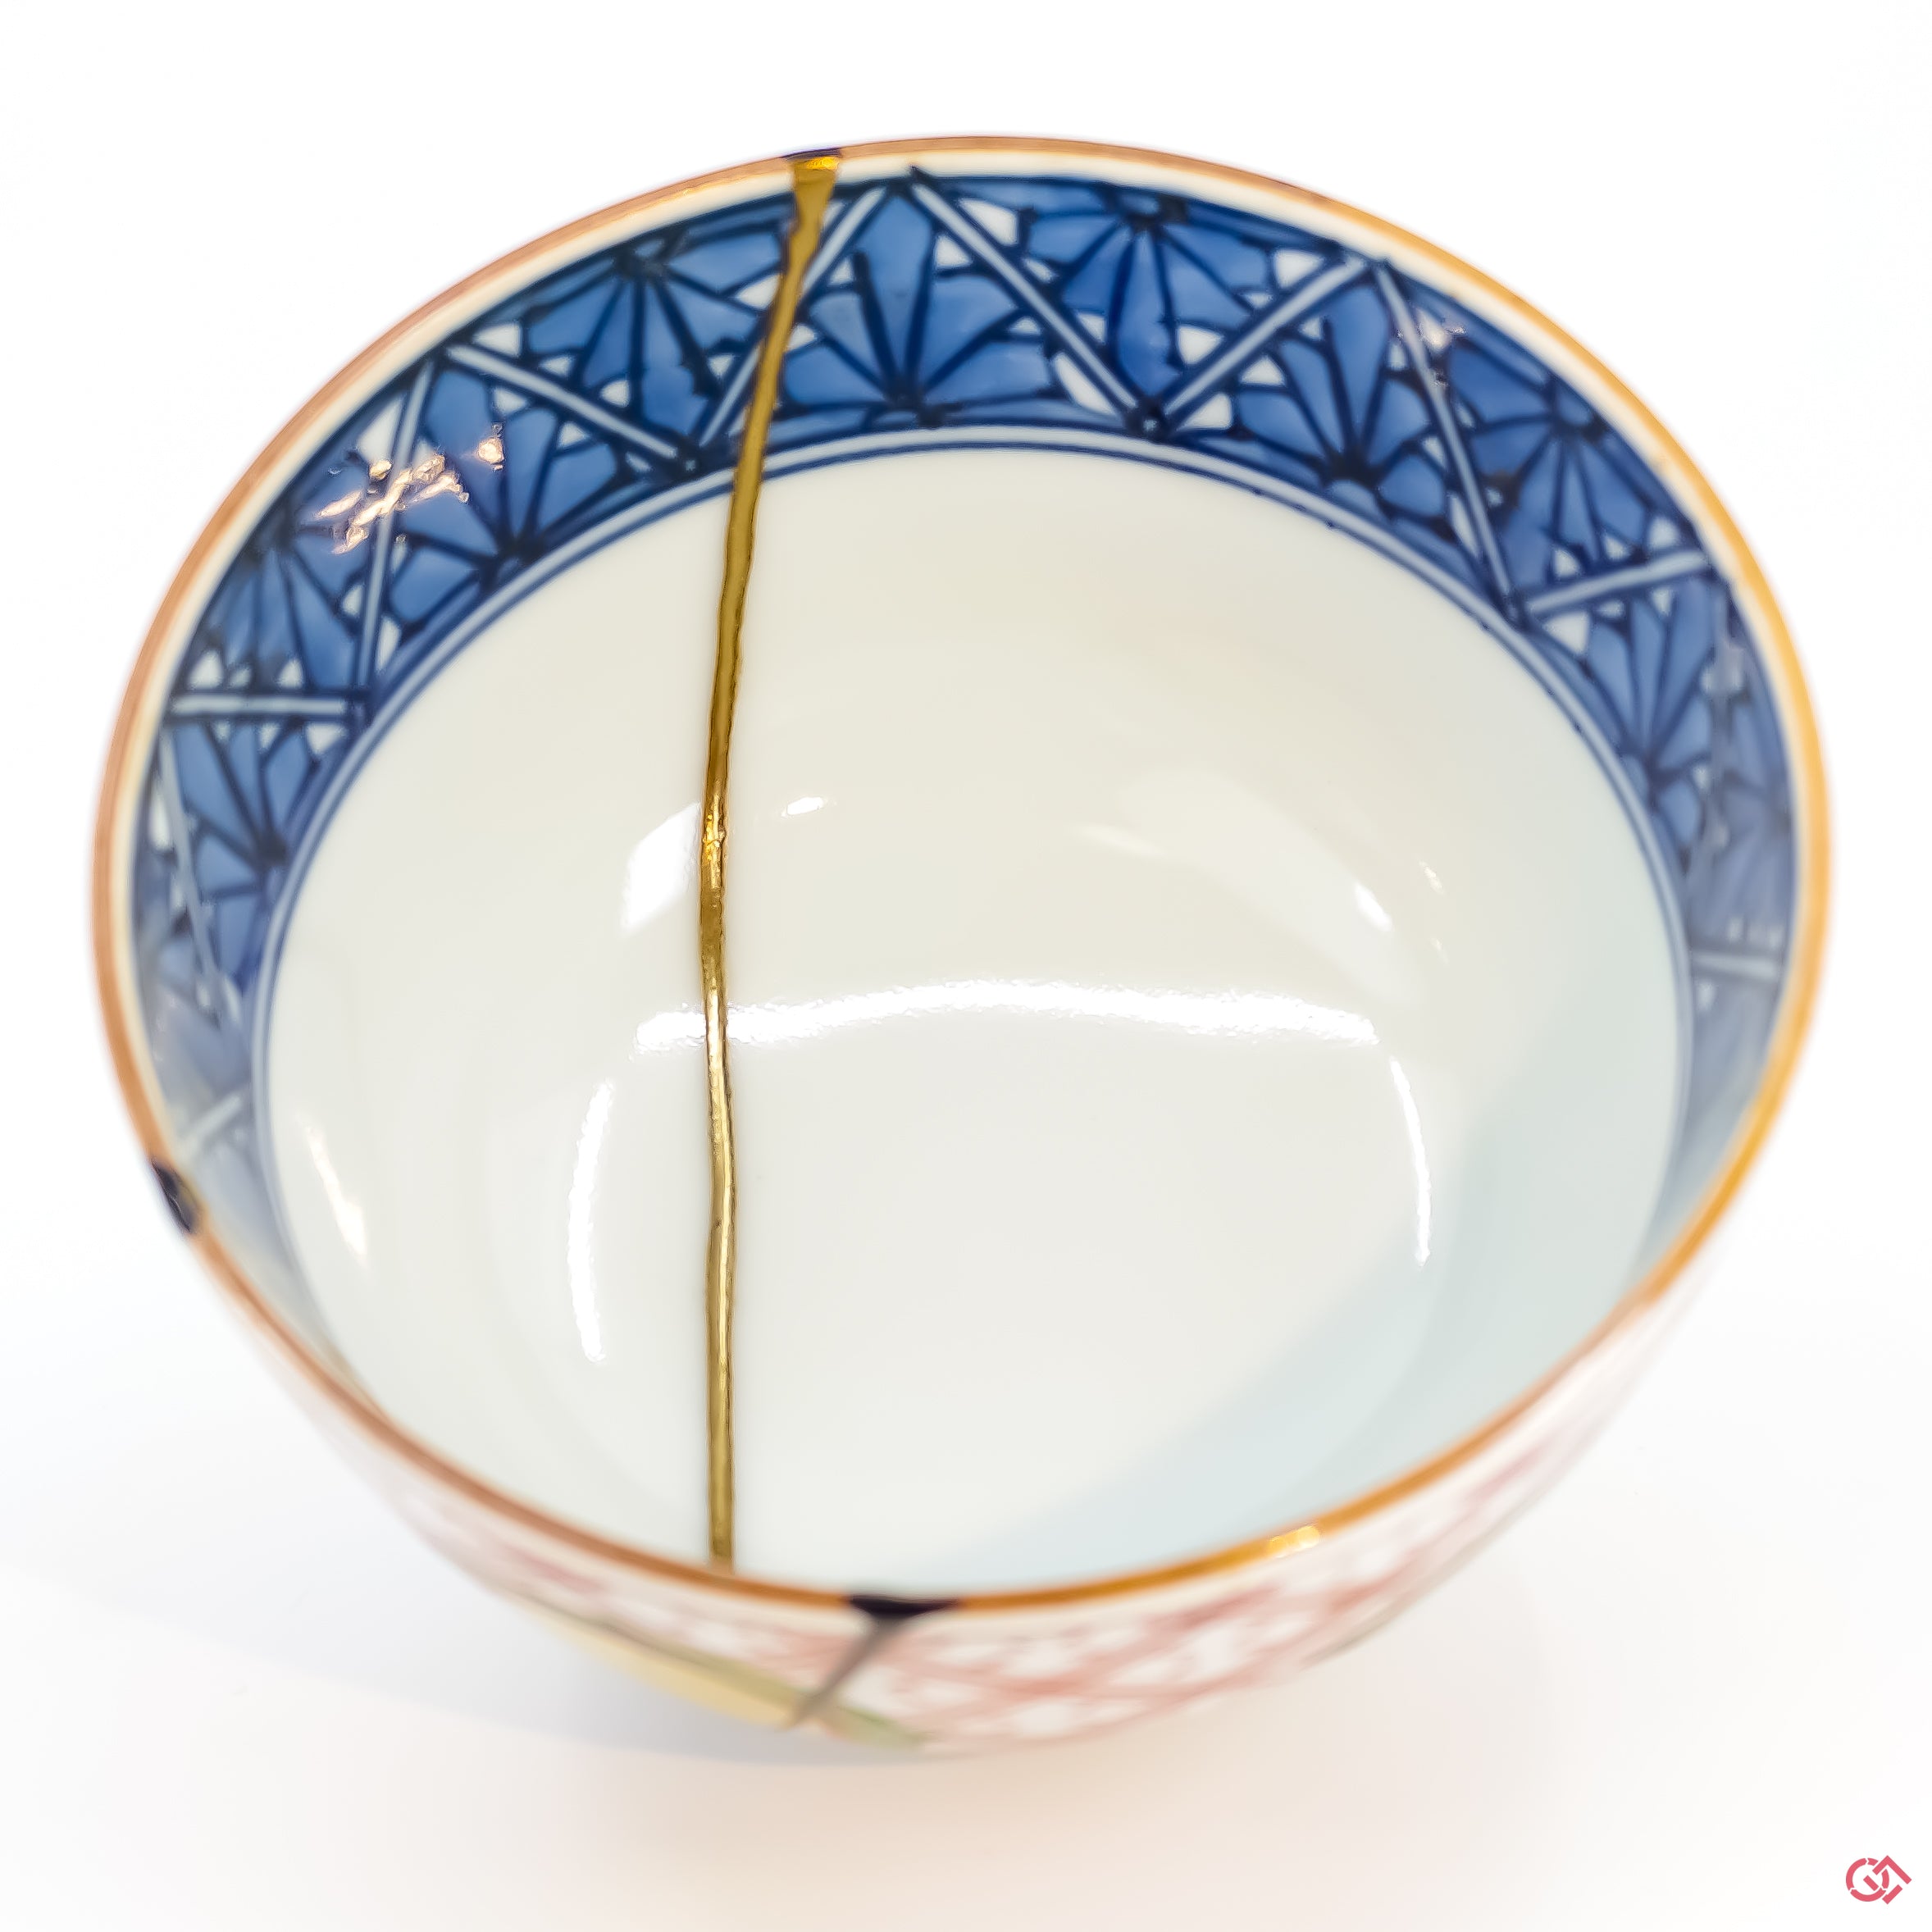 Buy the Japanese art of Kintsugi up close: Witness the delicate brushstrokes of gold that transform imperfection into beauty.